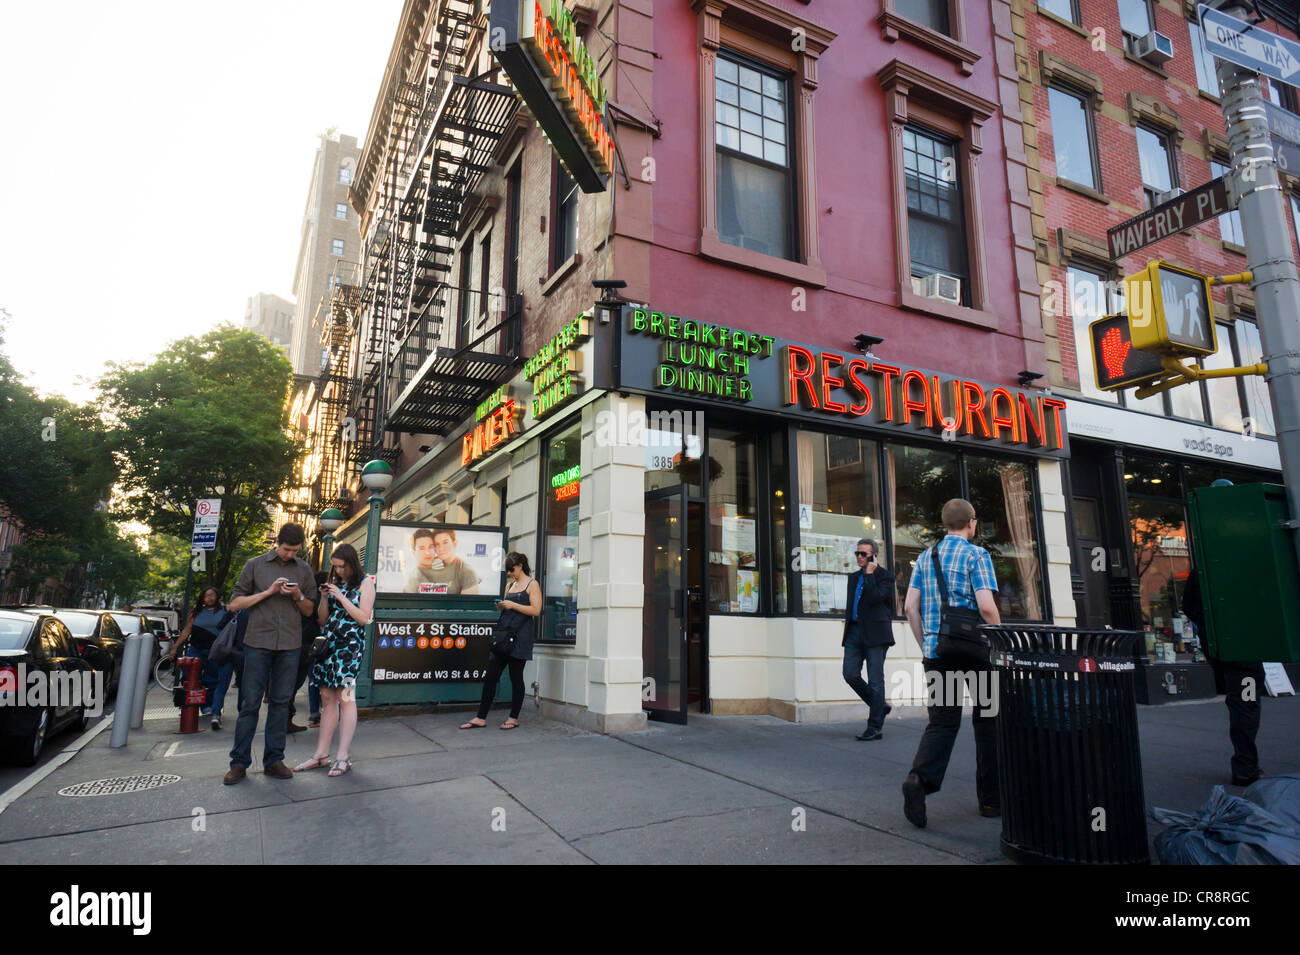 The Waverly Diner on Sixth Avenue in Greenwich Village in New York on Thursday, June 14, 2012. (© Richard B. Levine) Stock Photo